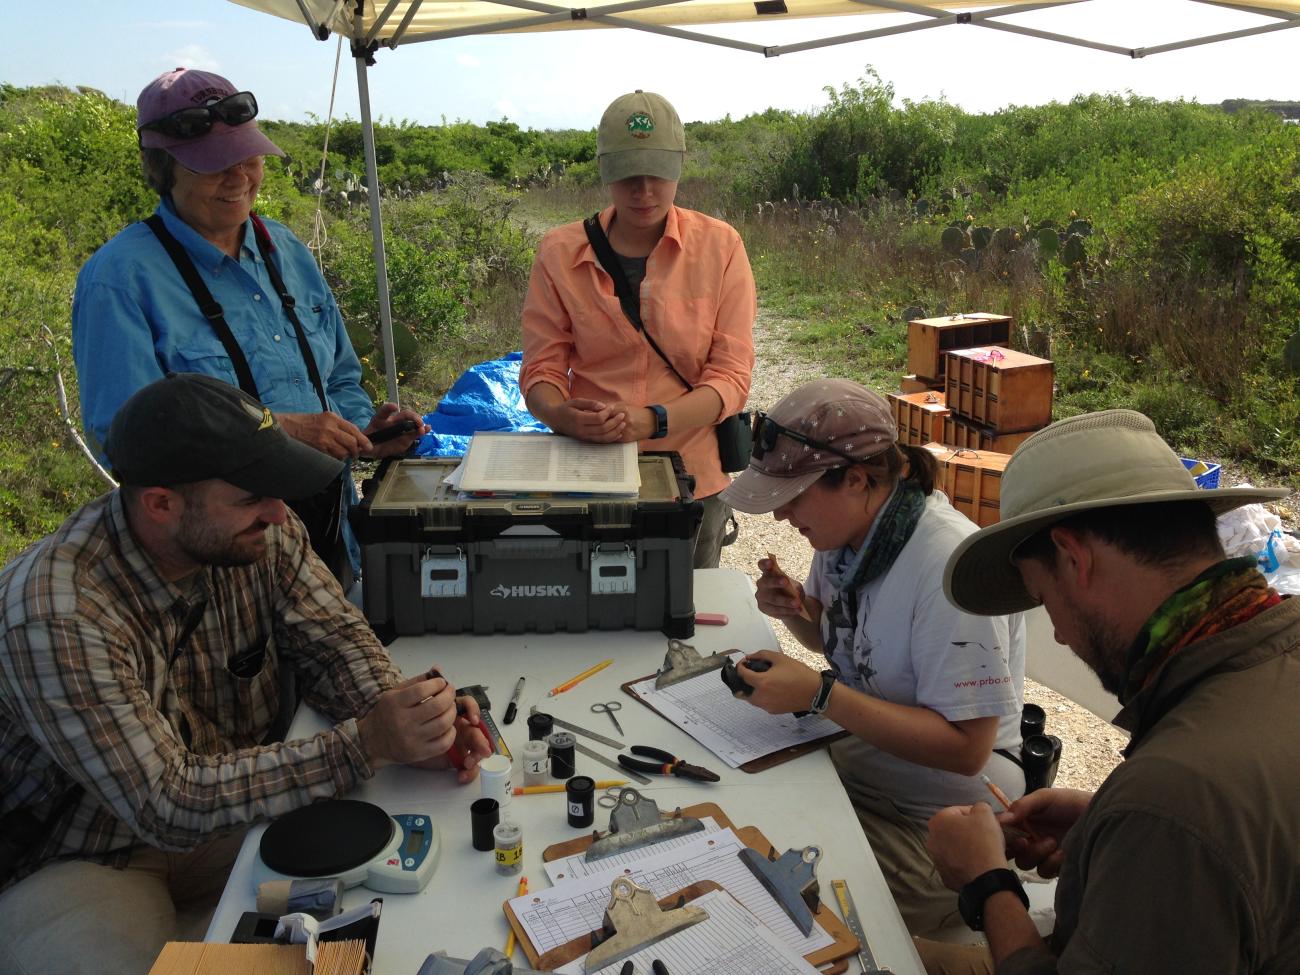 A group of scientists sits around a table in the field making notes on clipboards